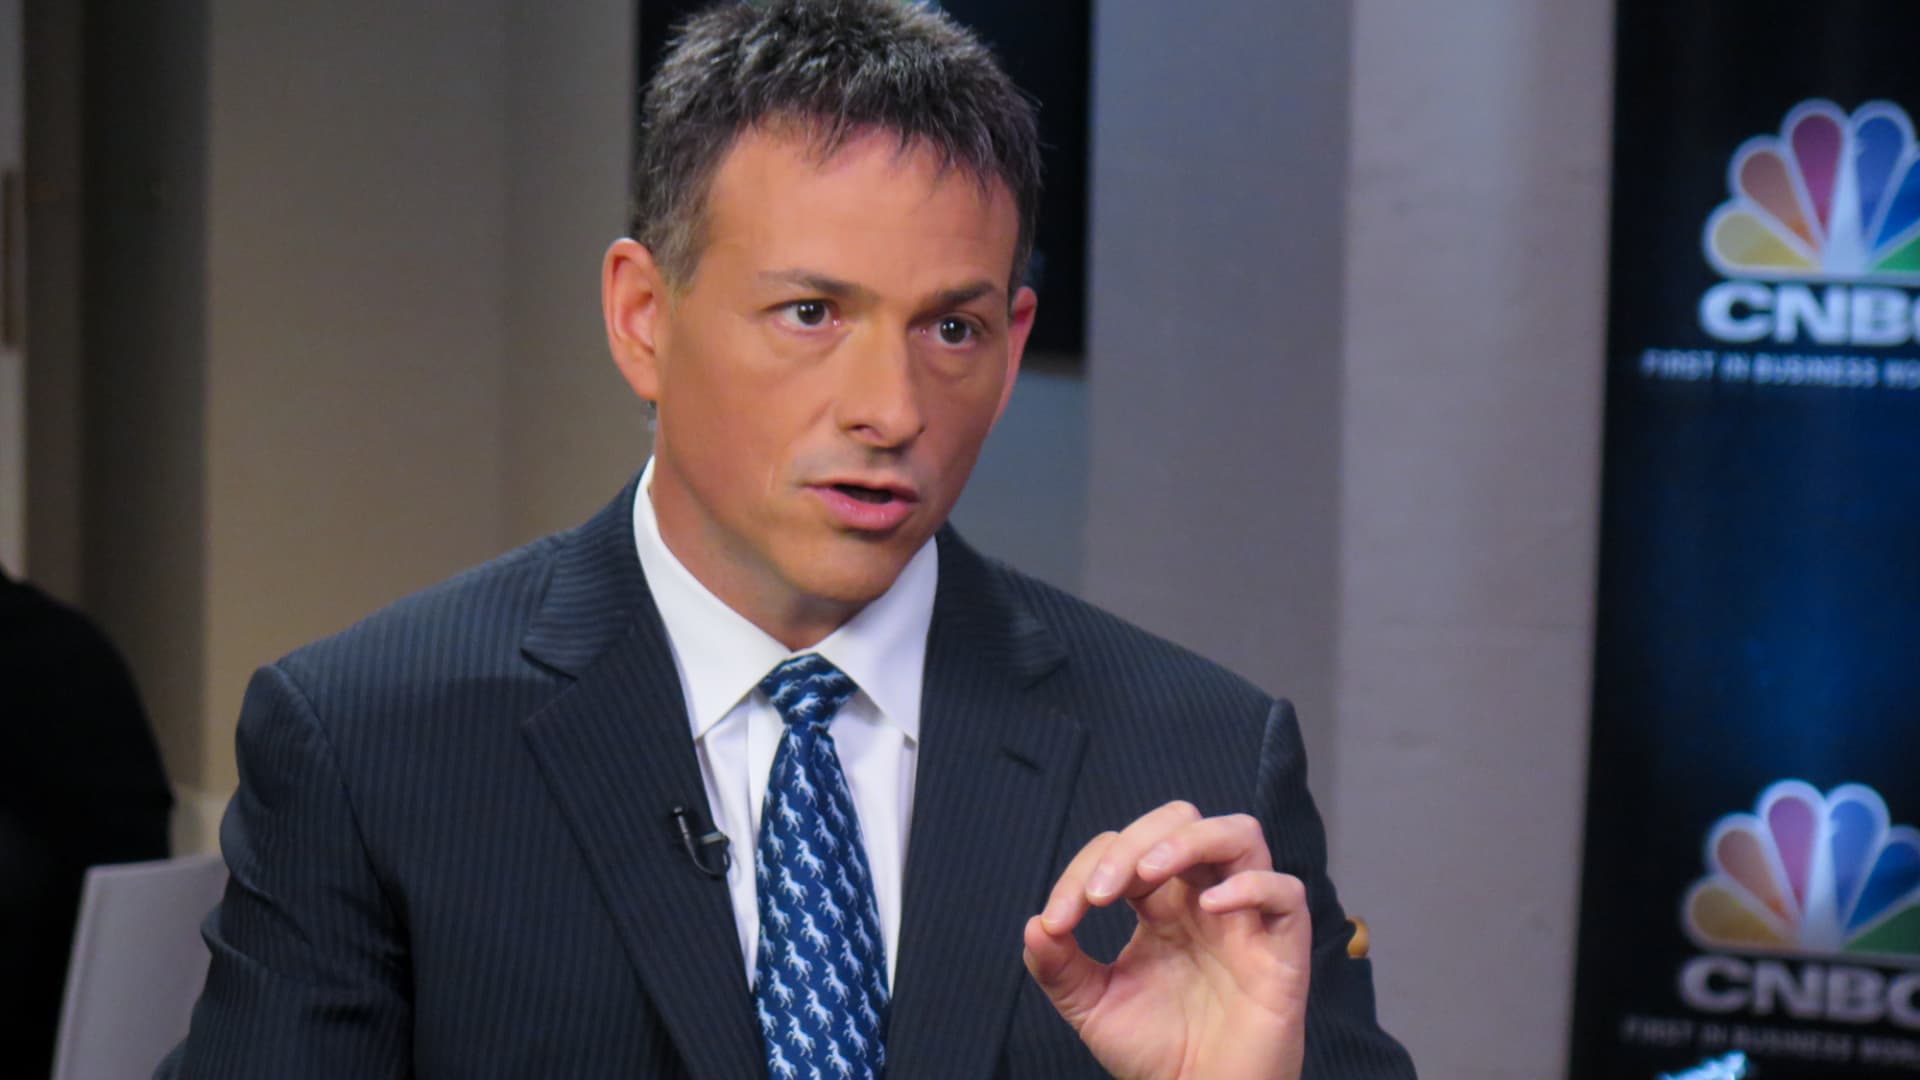 David Einhorn, who is trouncing the market this year, bought a small cap crude oil play